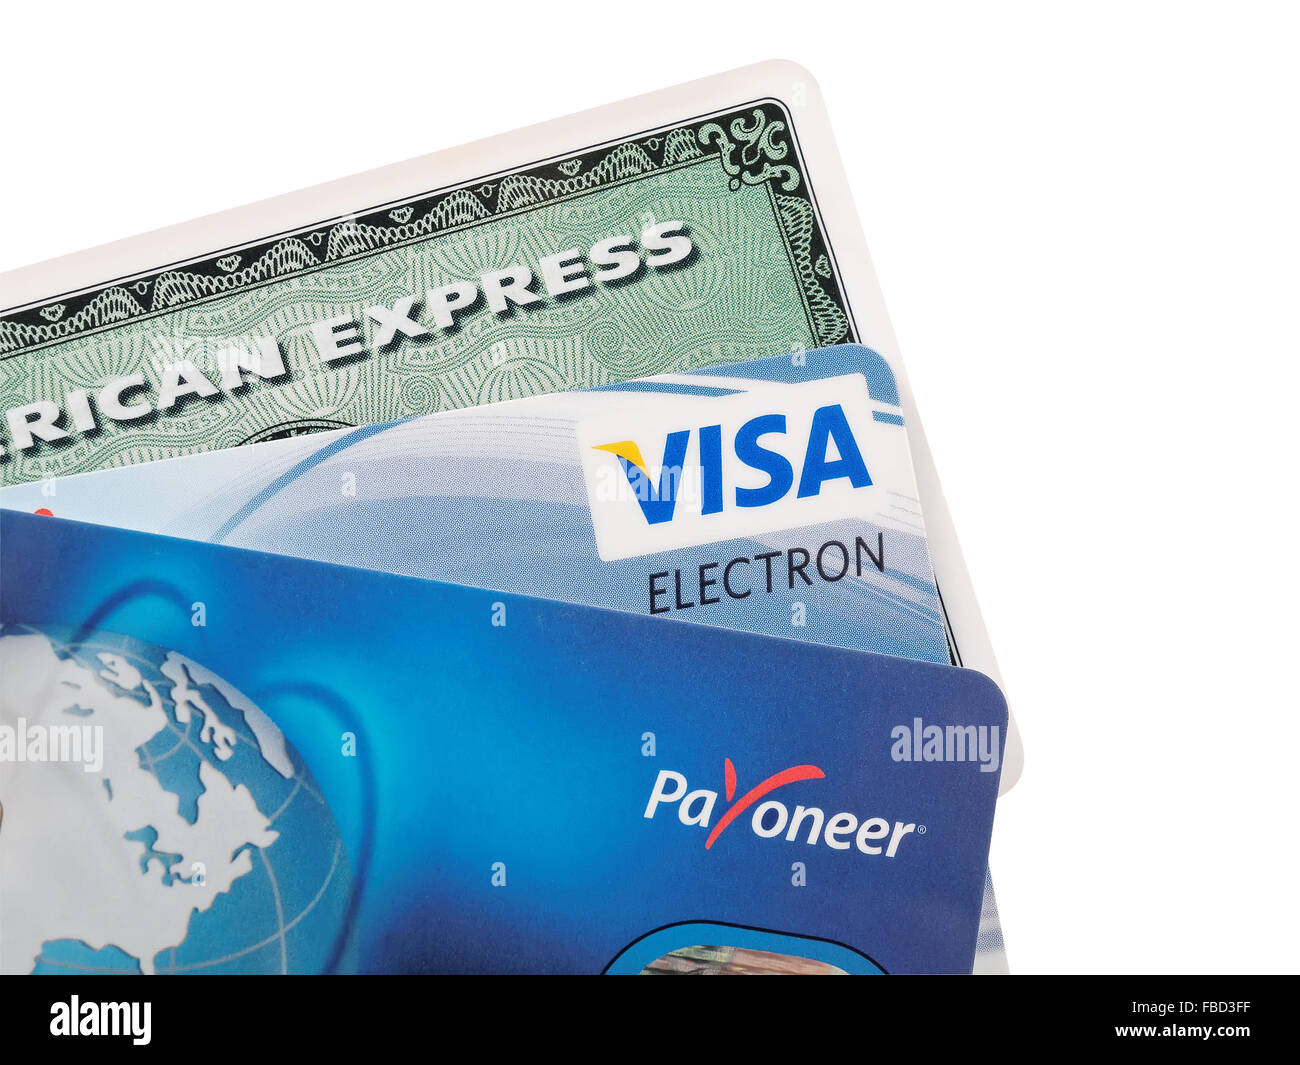 Closeup studio shot of credit cards issued by the three major brands American Express, VISA and Payoneer. Stock Photo